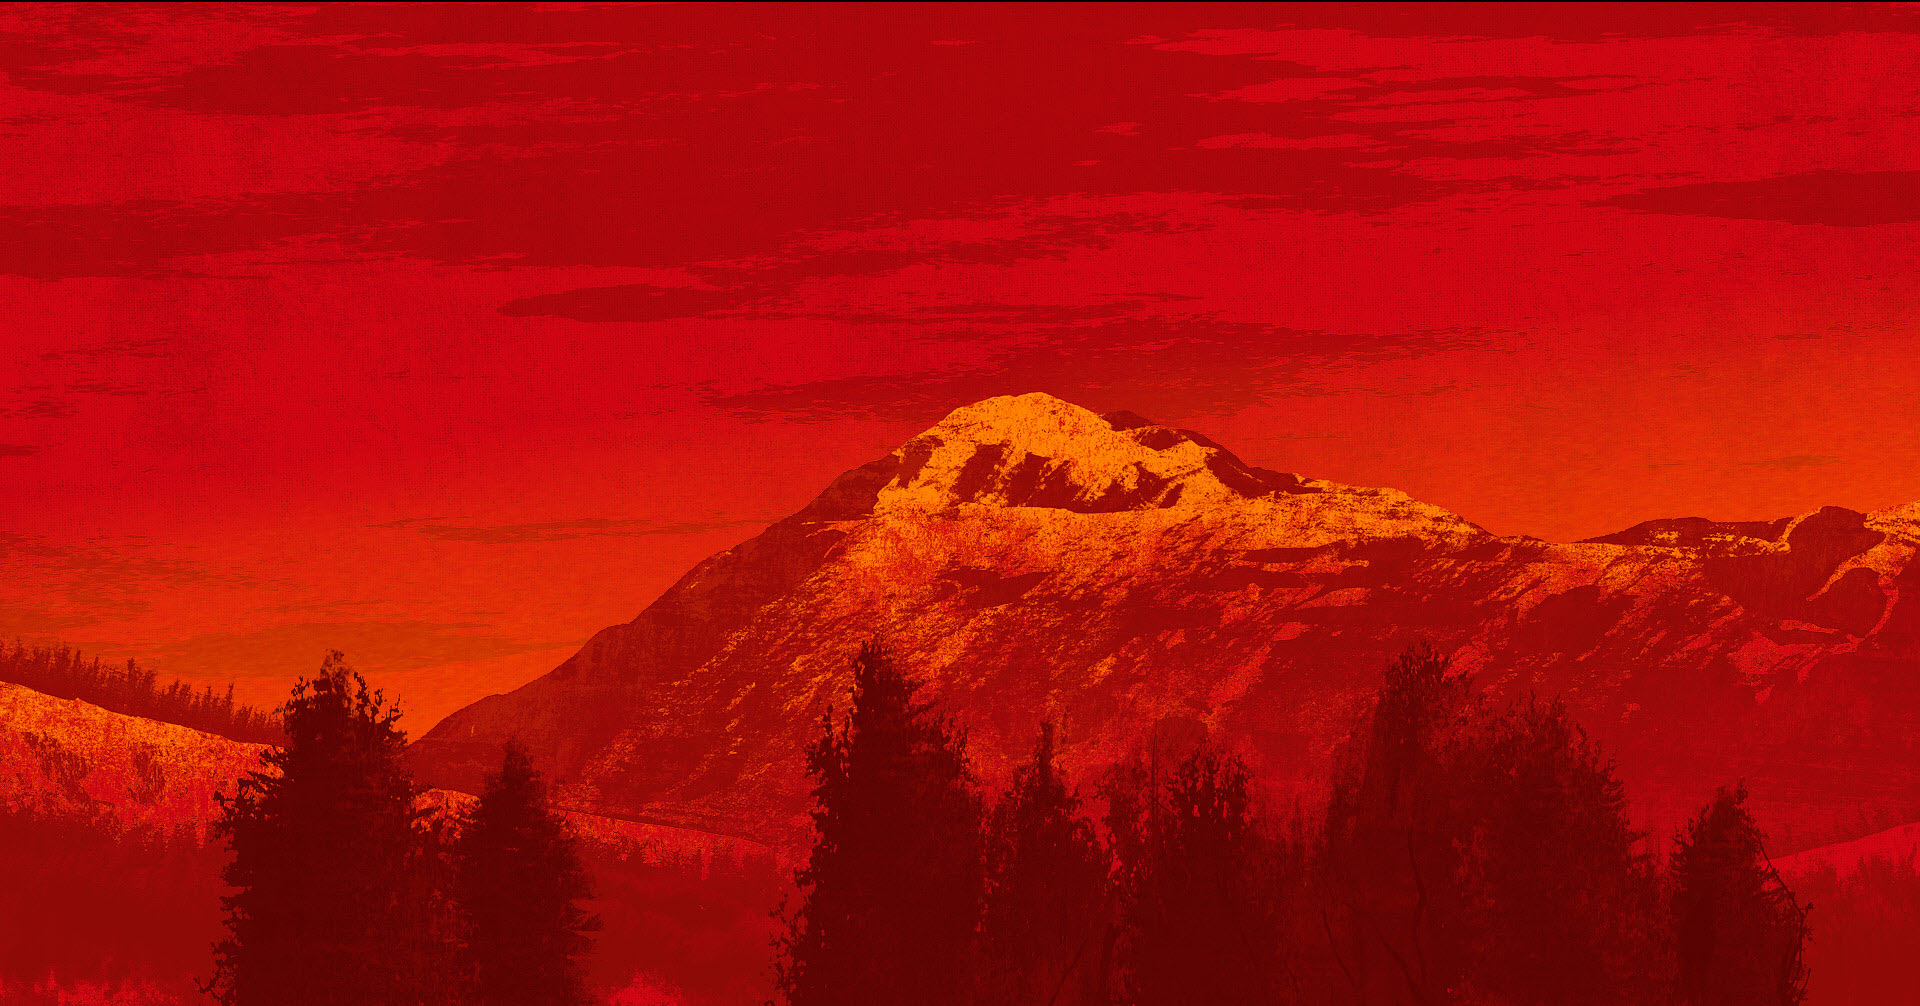 a snow mountain and trees in a red background